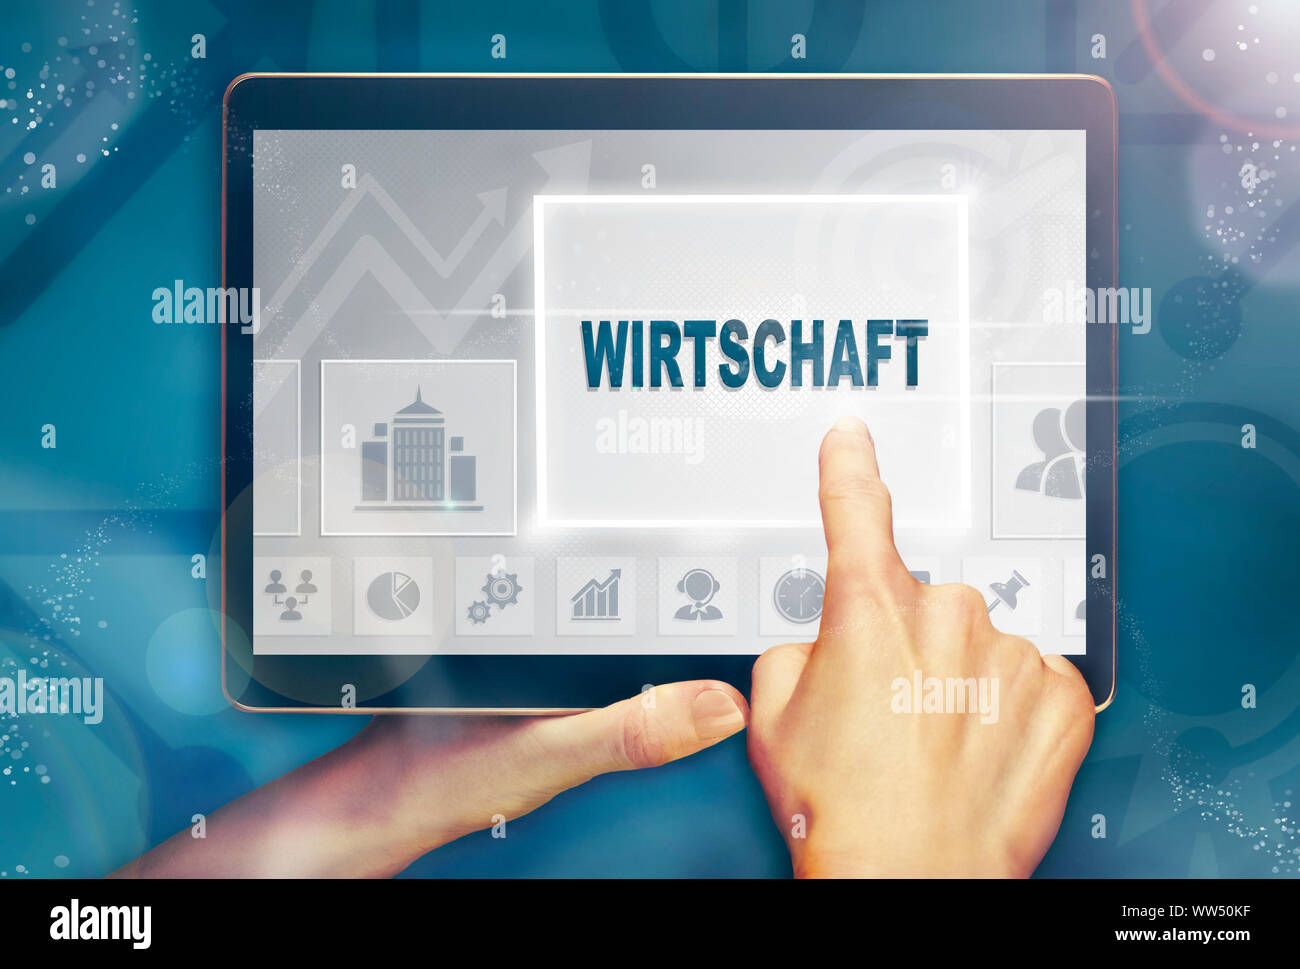 A hand holiding a computer tablet and pressing a Economy "Wirtschaft" business concept. Stock Photo